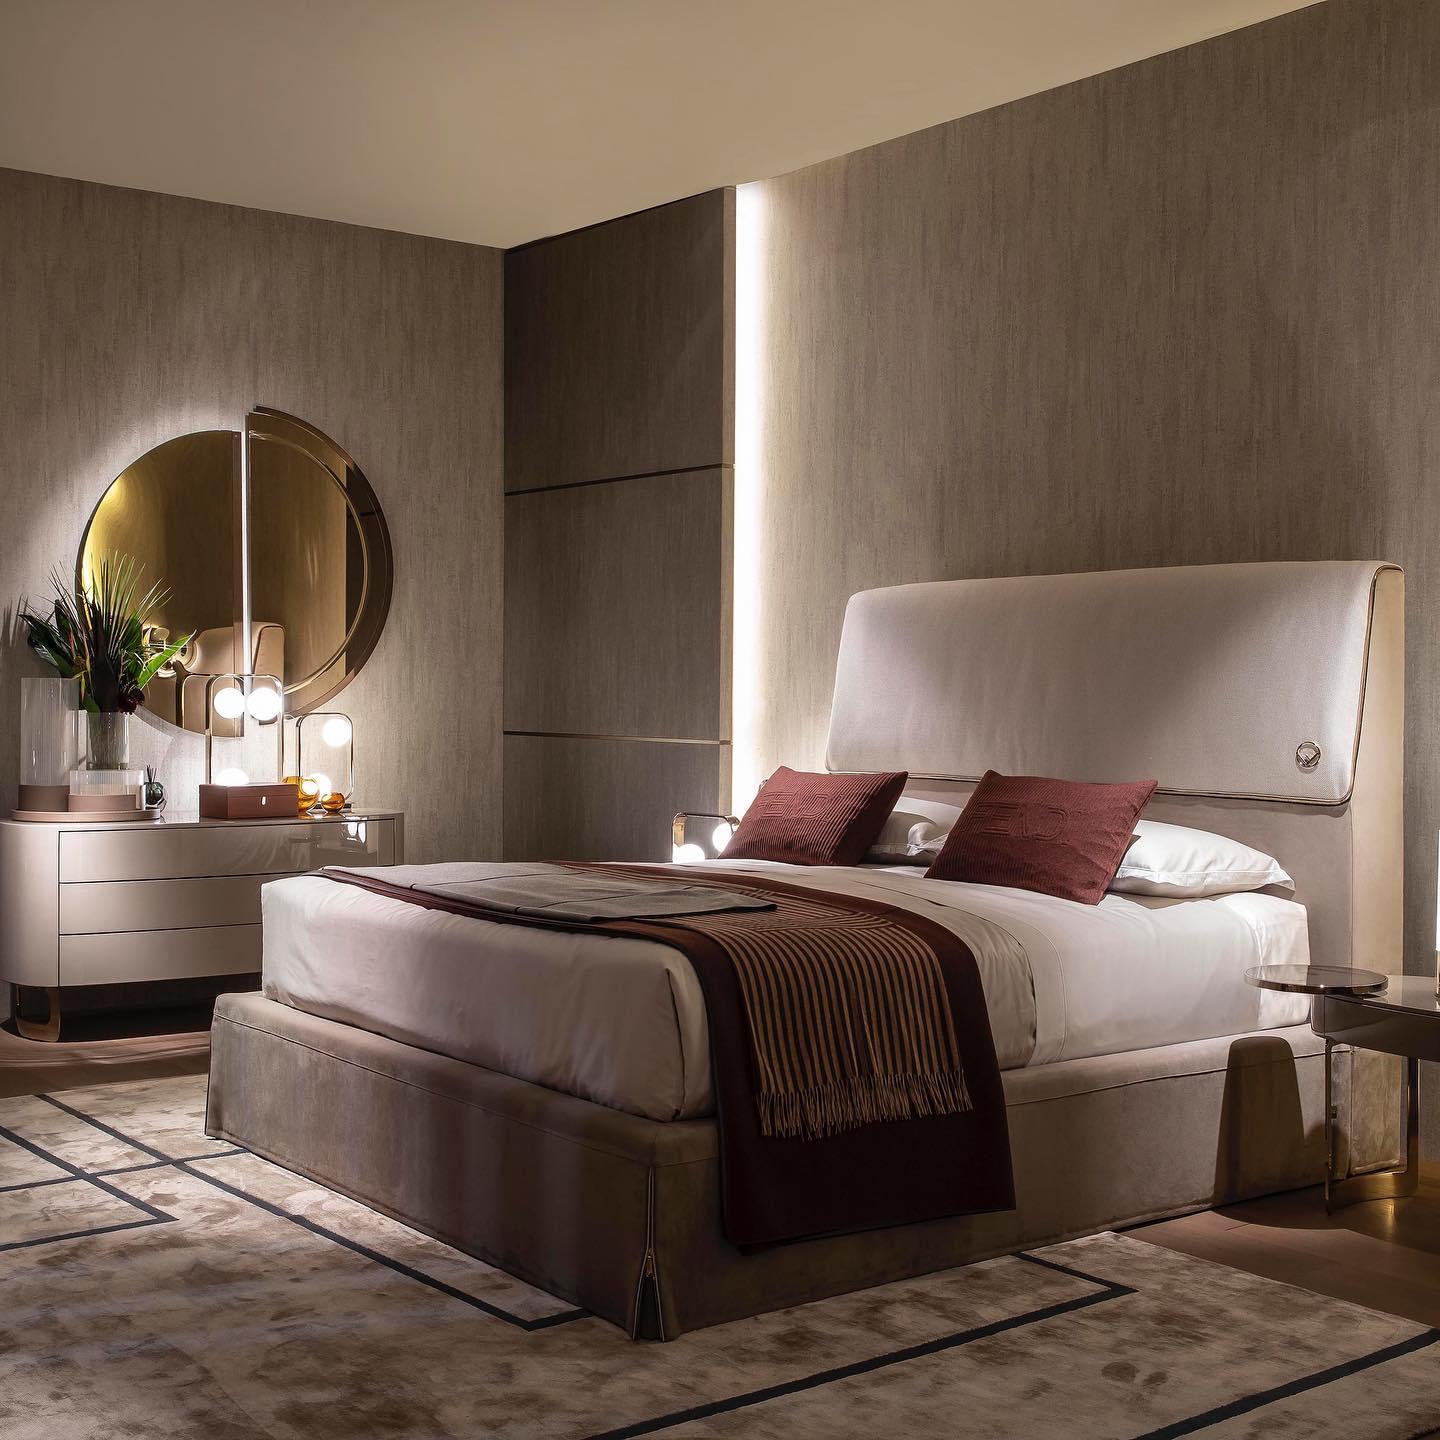 Modern Dorian Bed Cream Leather Handmade in Italy by Fendi

The Fendi Dorian bed is a luxurious bed that embodies elegant design and comfort for a restful sleep. 

The bed has soft lines and an elegant, sophisticated design that gives the room a